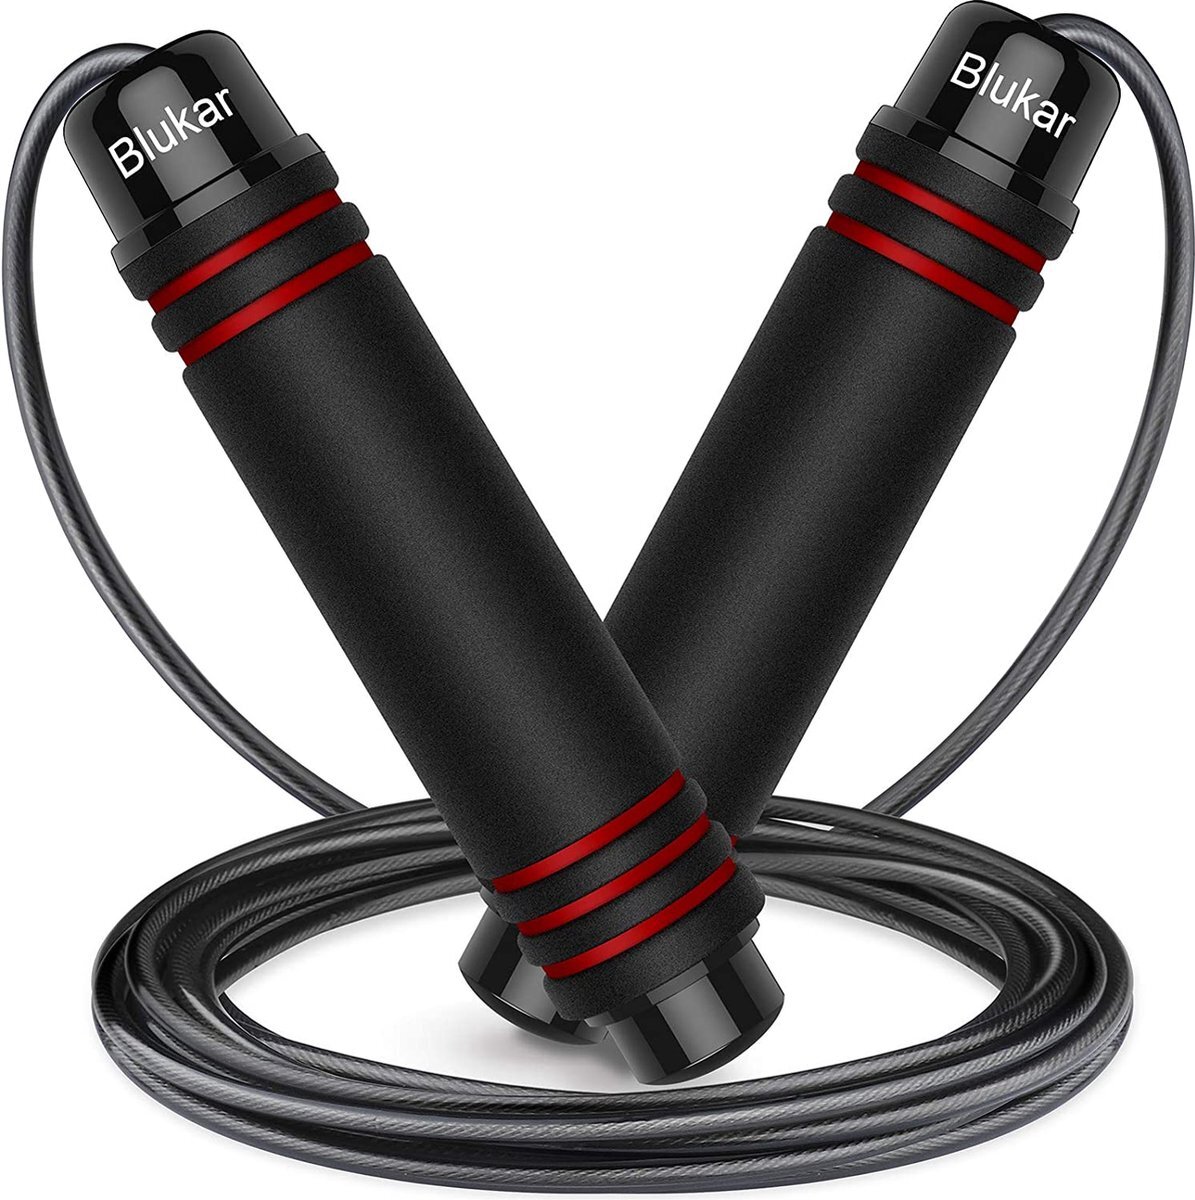 merk lose Blukar Skipping Rope with Skin-Friendly Foam Handles, Speed Rope, Adjustable Length, Non-Slip and Ideal for Fitness and Endurance Training, Suitable for Children and Adults